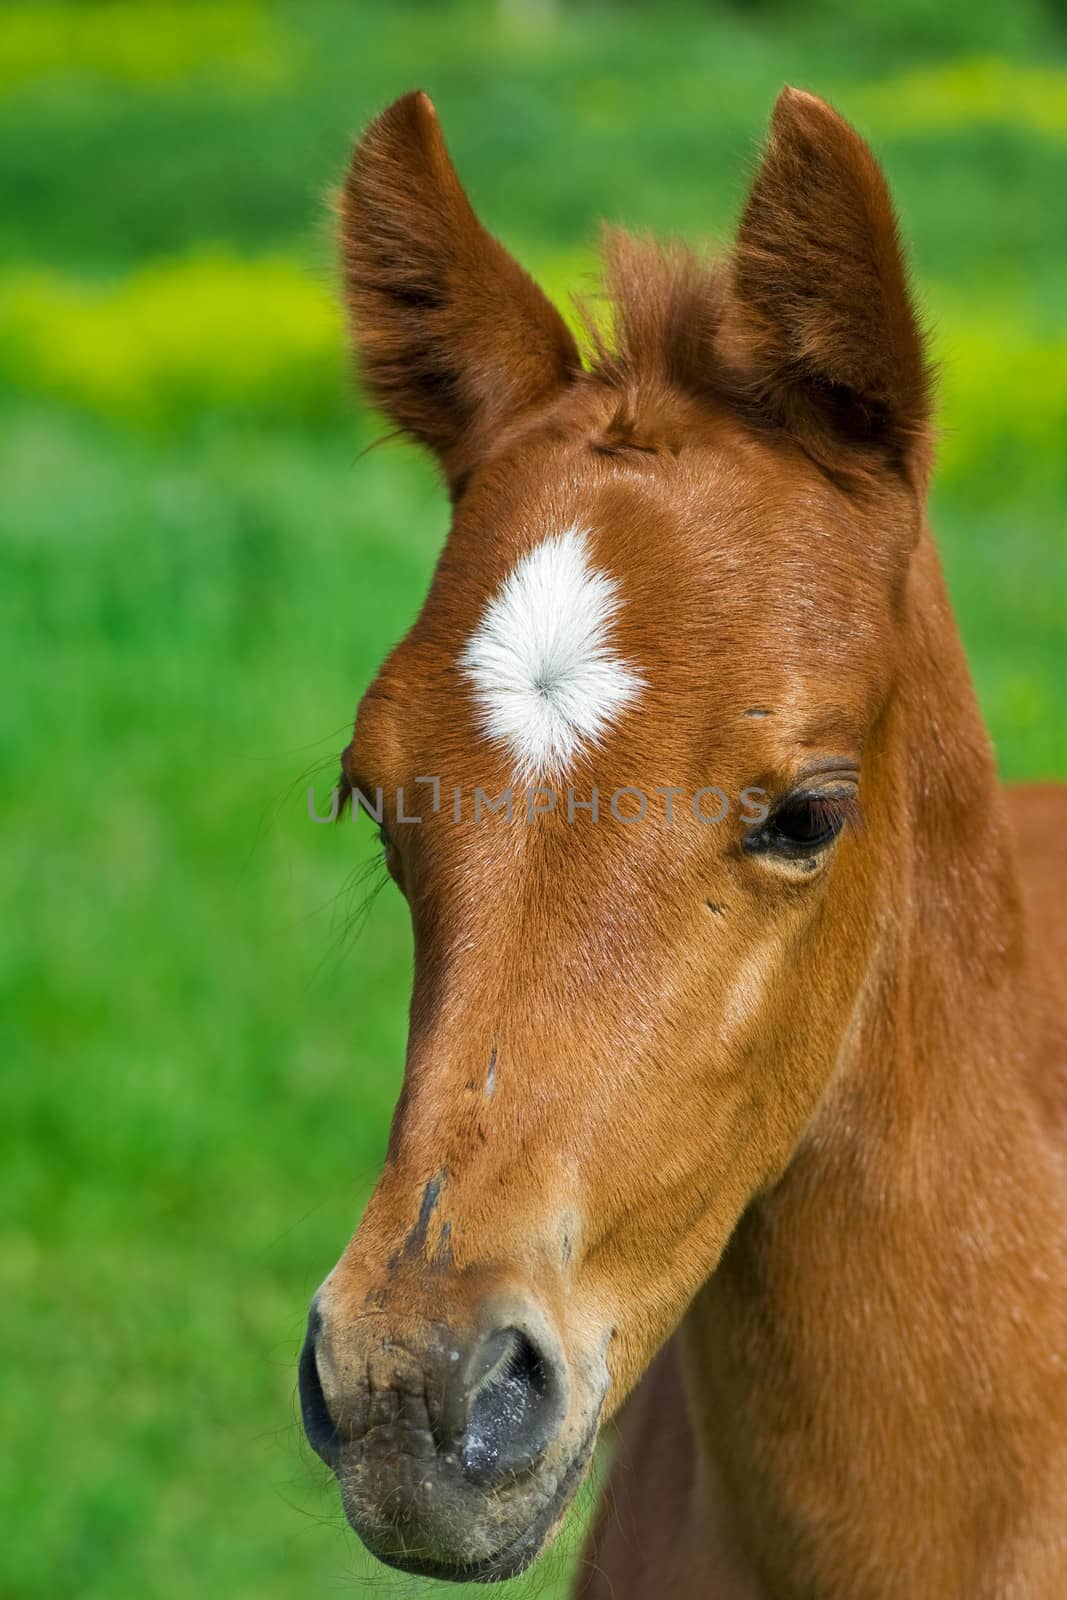 
portrait of young horse on green grass background